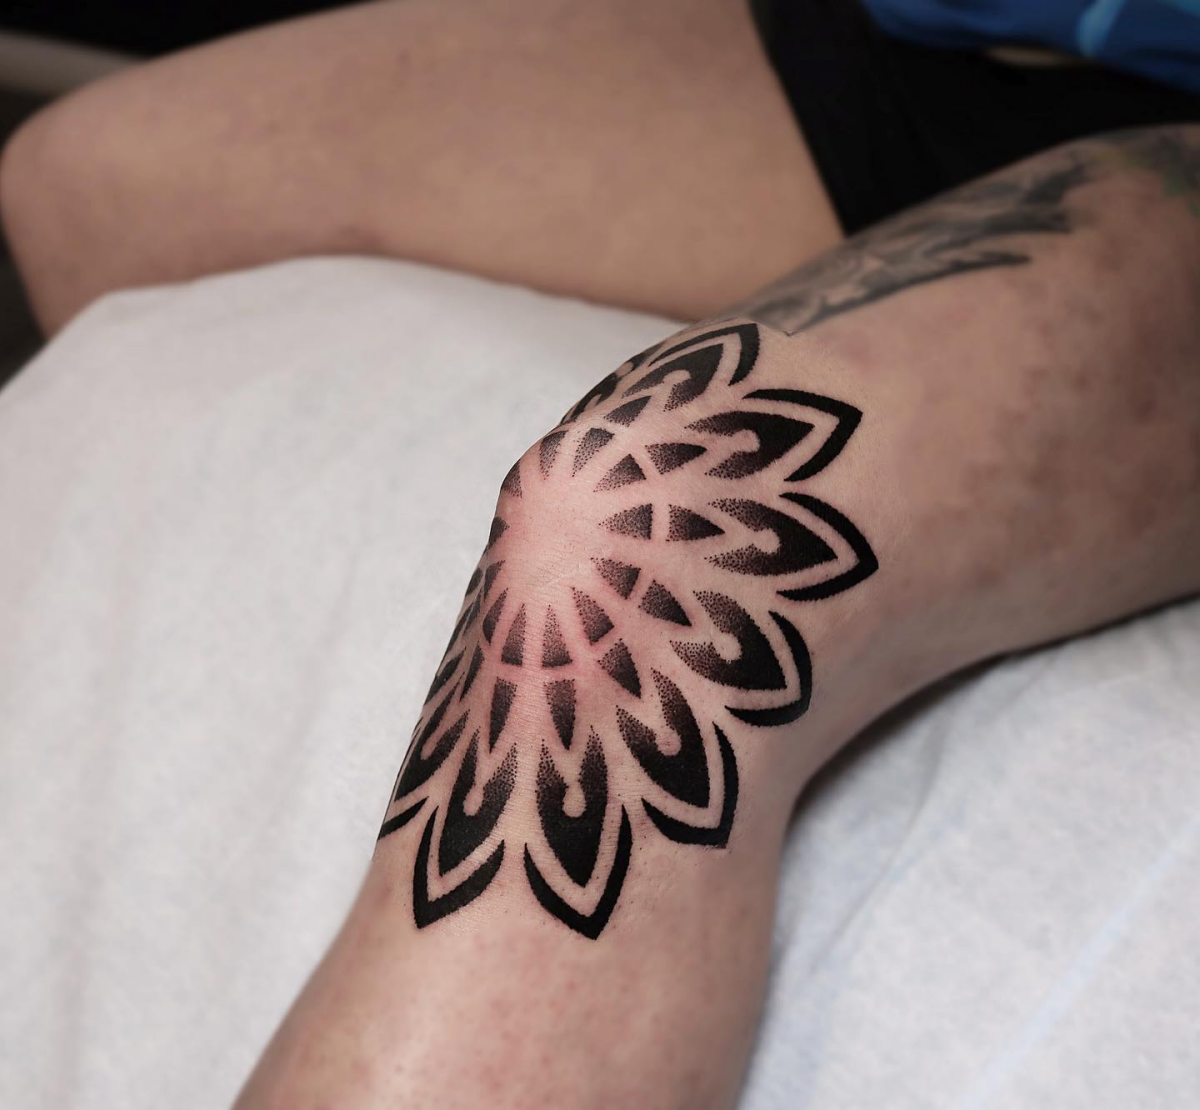 Knee-d Inspiration? Here Are 15 Knee Tattoos That Will Leave You Inspired